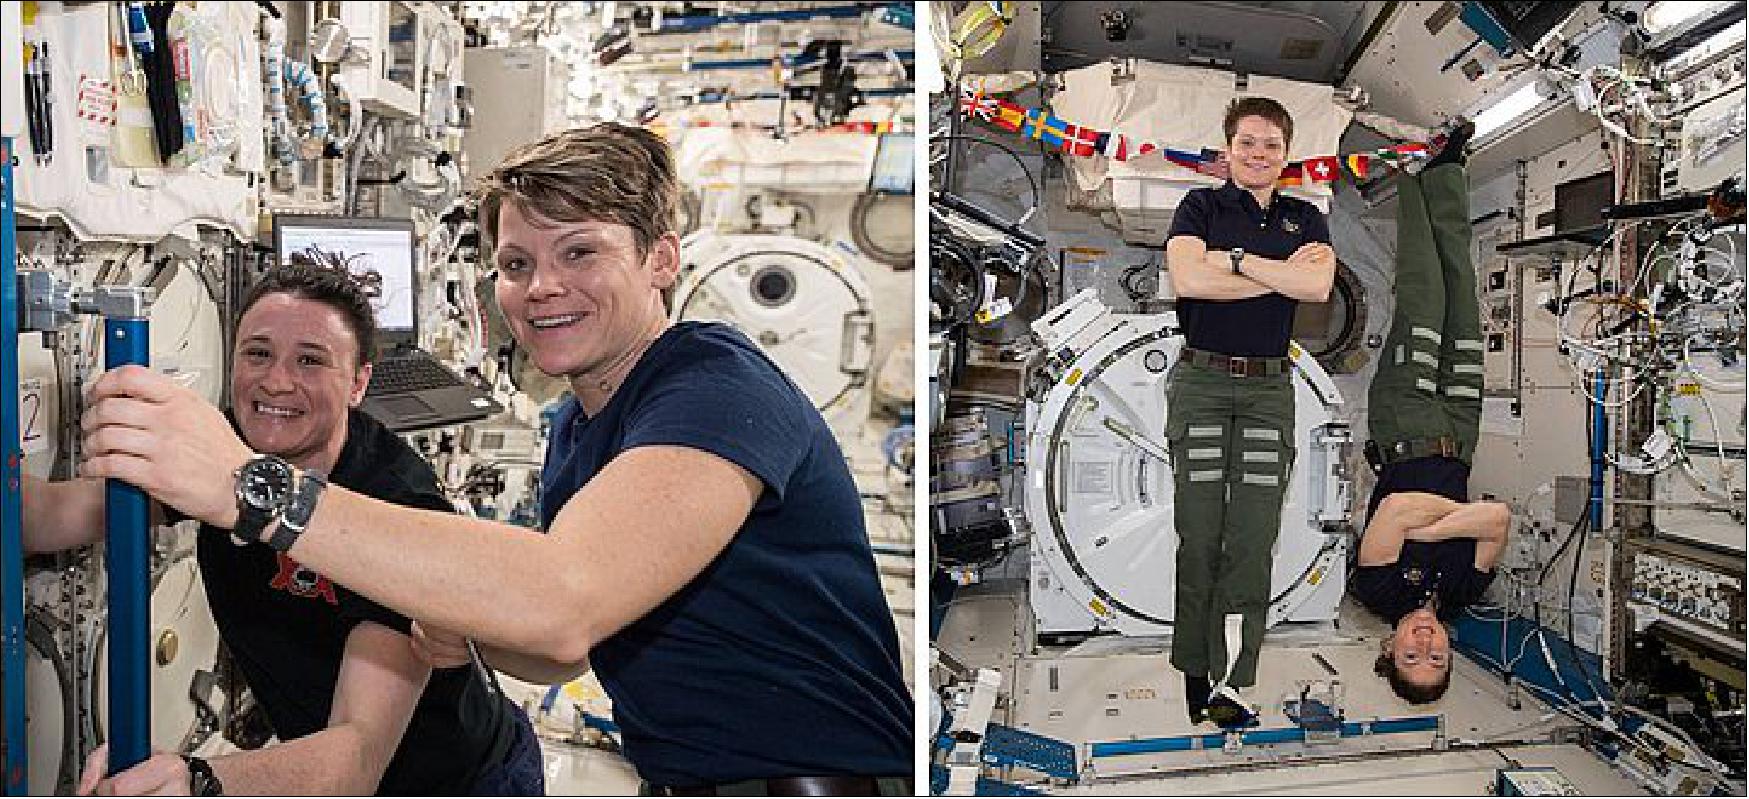 Figure 102: Left: Auñón-Chancellor (at left) and McClain working together in the Kibo module during Expedition 57. Right: McClain (at left) and Koch demonstrating weightlessness during Expedition 59 (image credit: NASA/JSC)